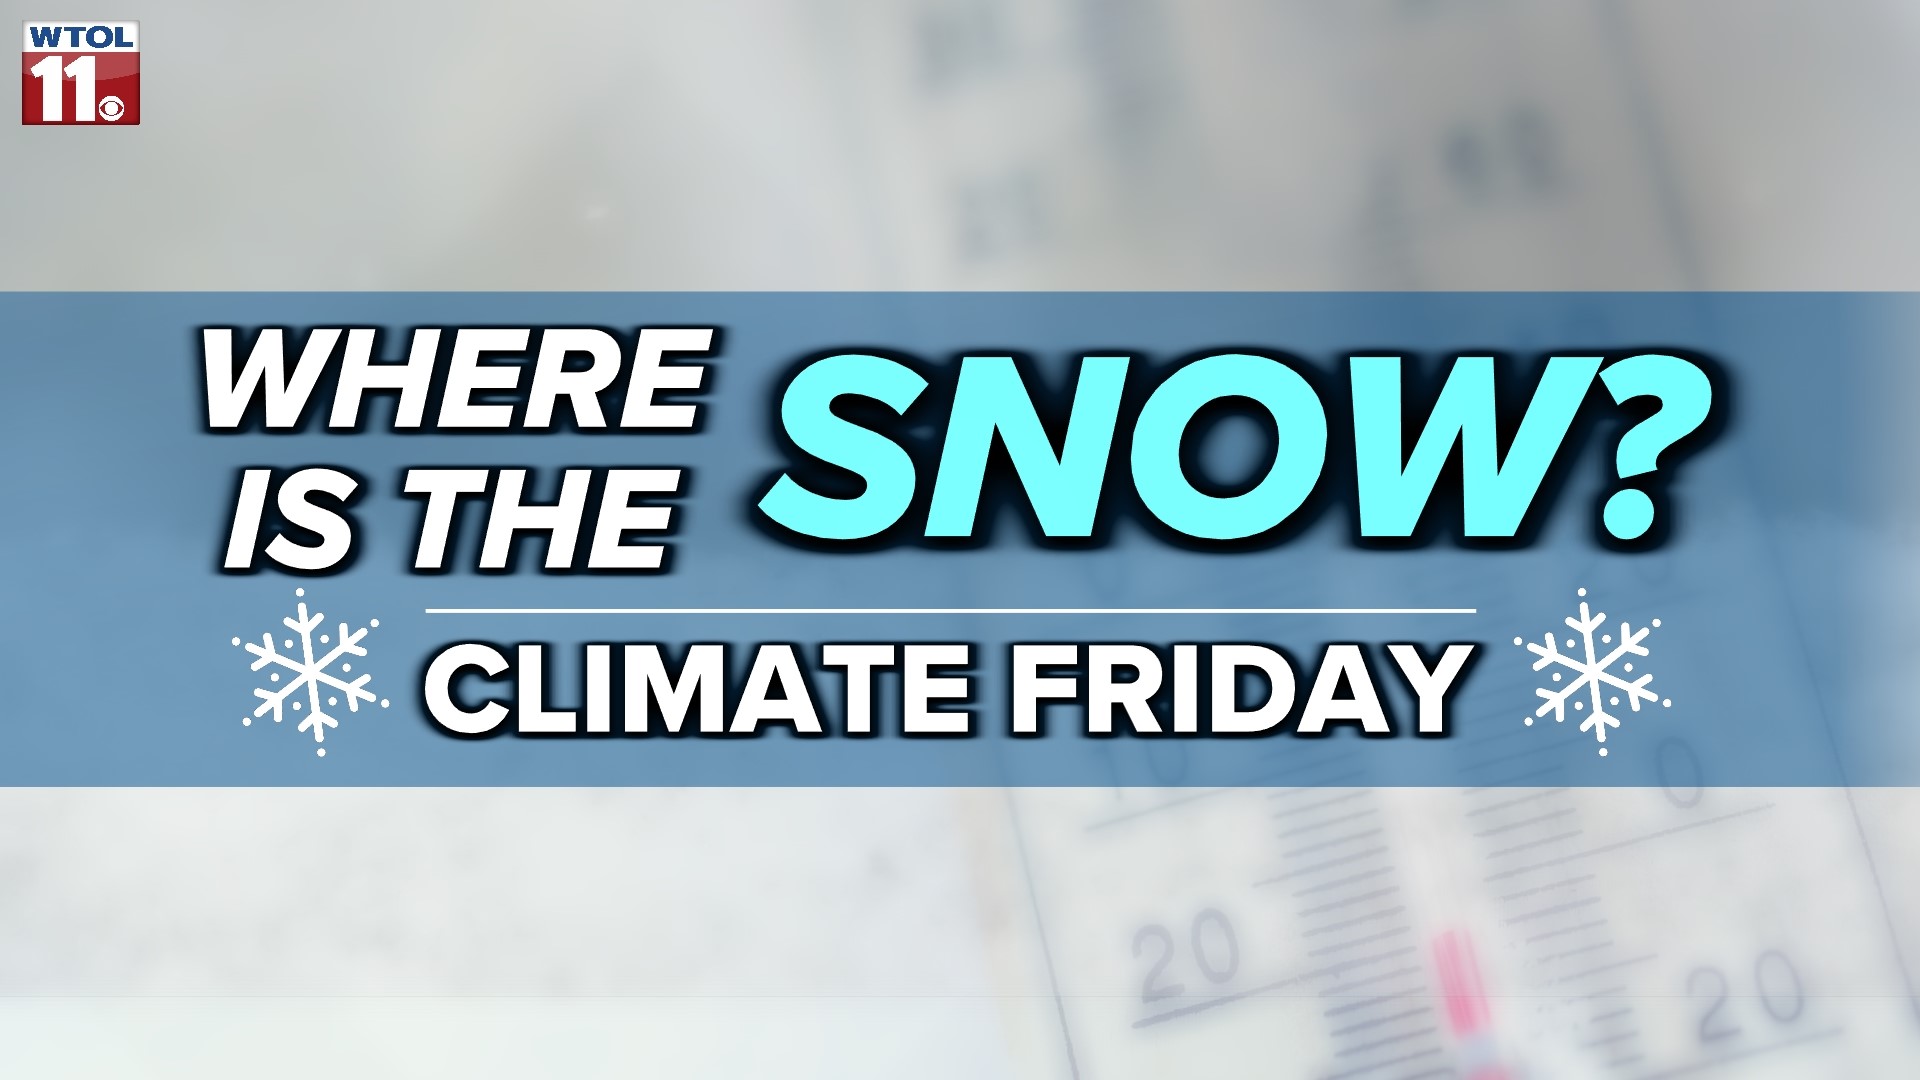 WTOL 11 Meteorologist John Burchfield looks at data from a rainy, but not snowy month.